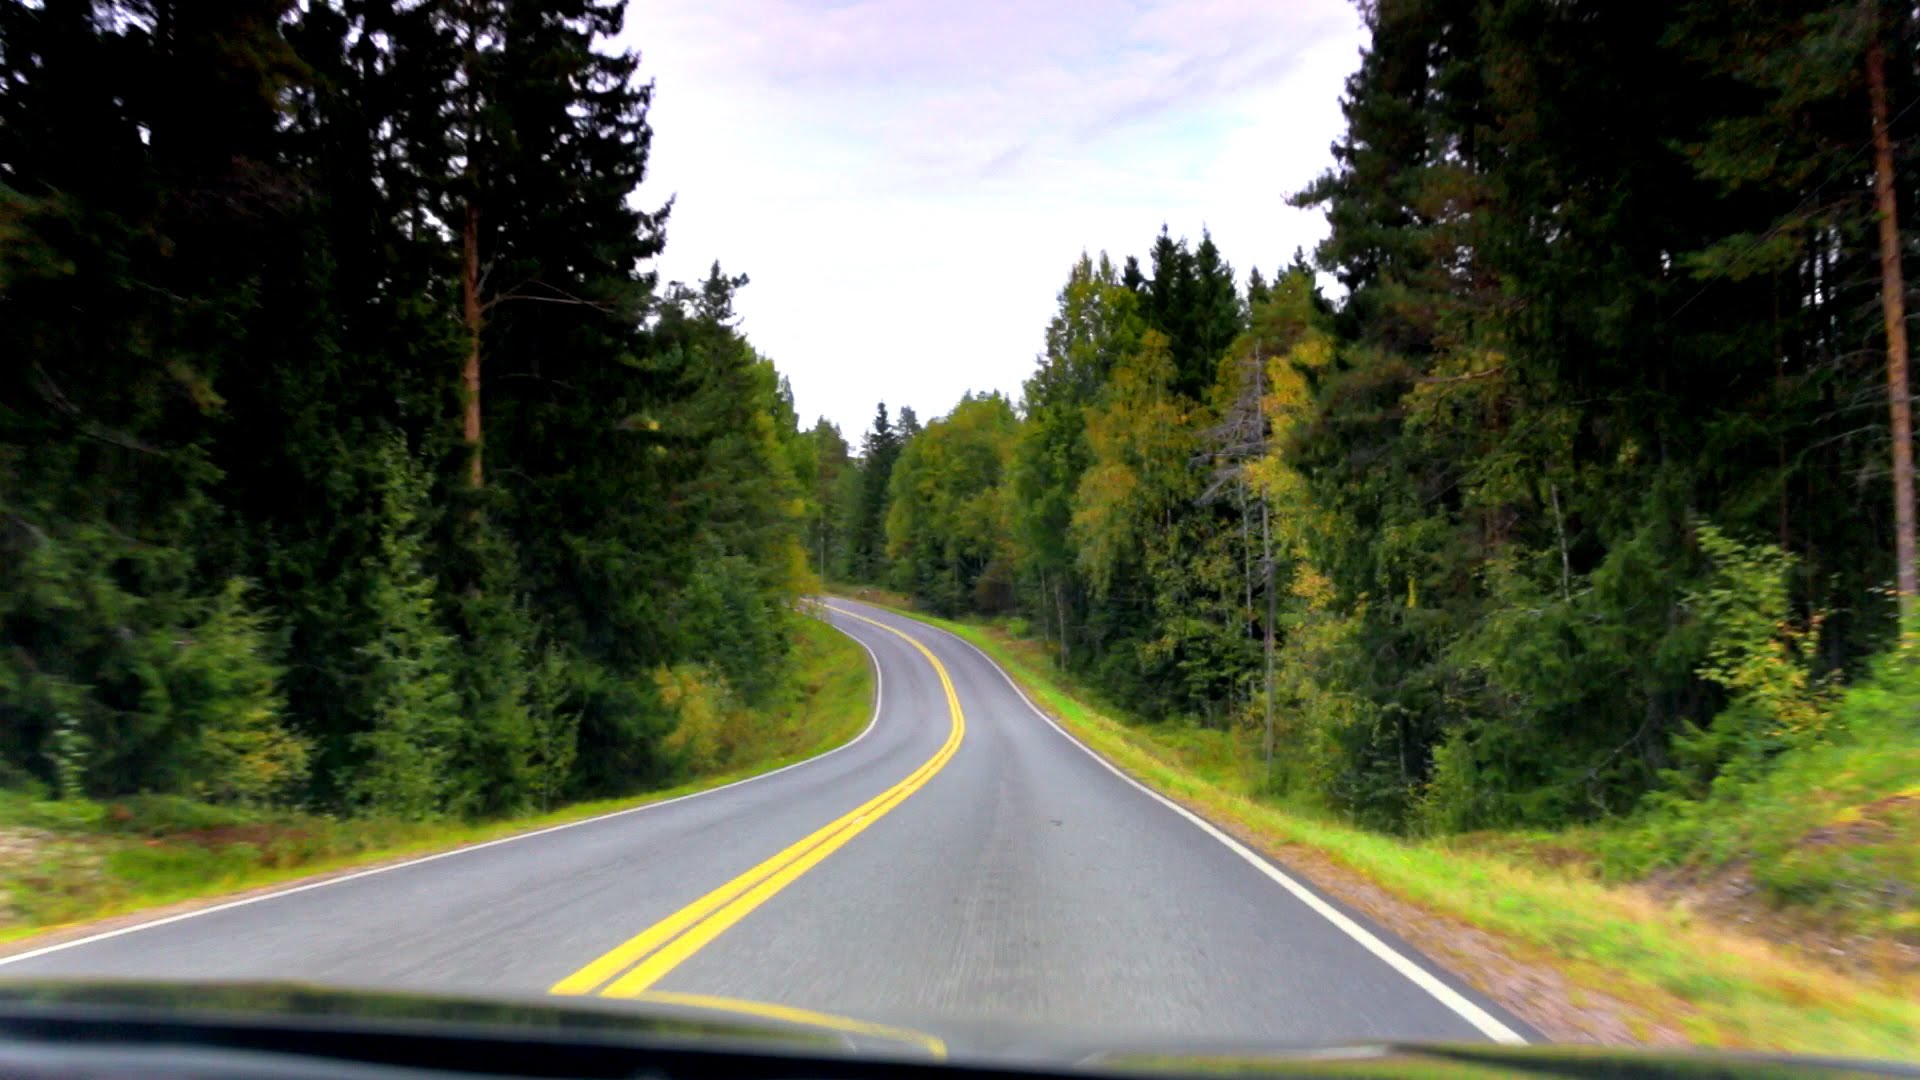 Road trip - Finland, road 8300 - YouTube